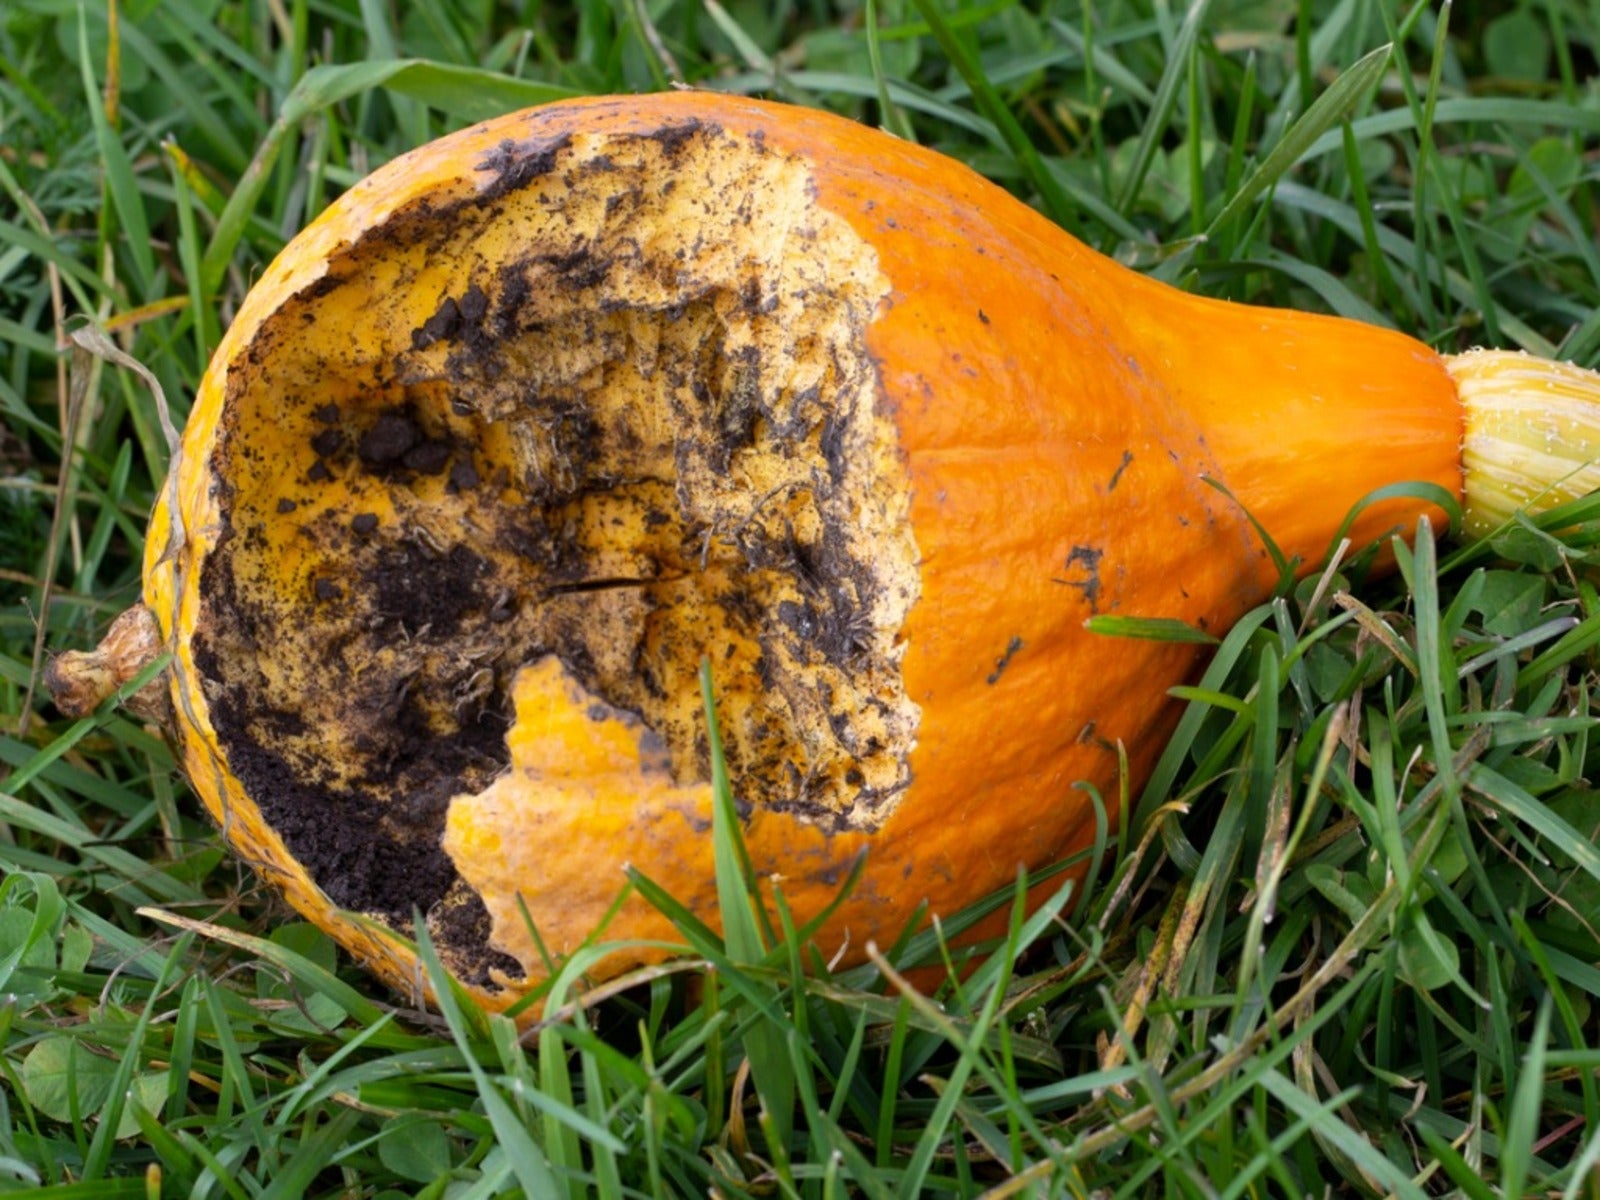 A squash that has been chewed up by animals